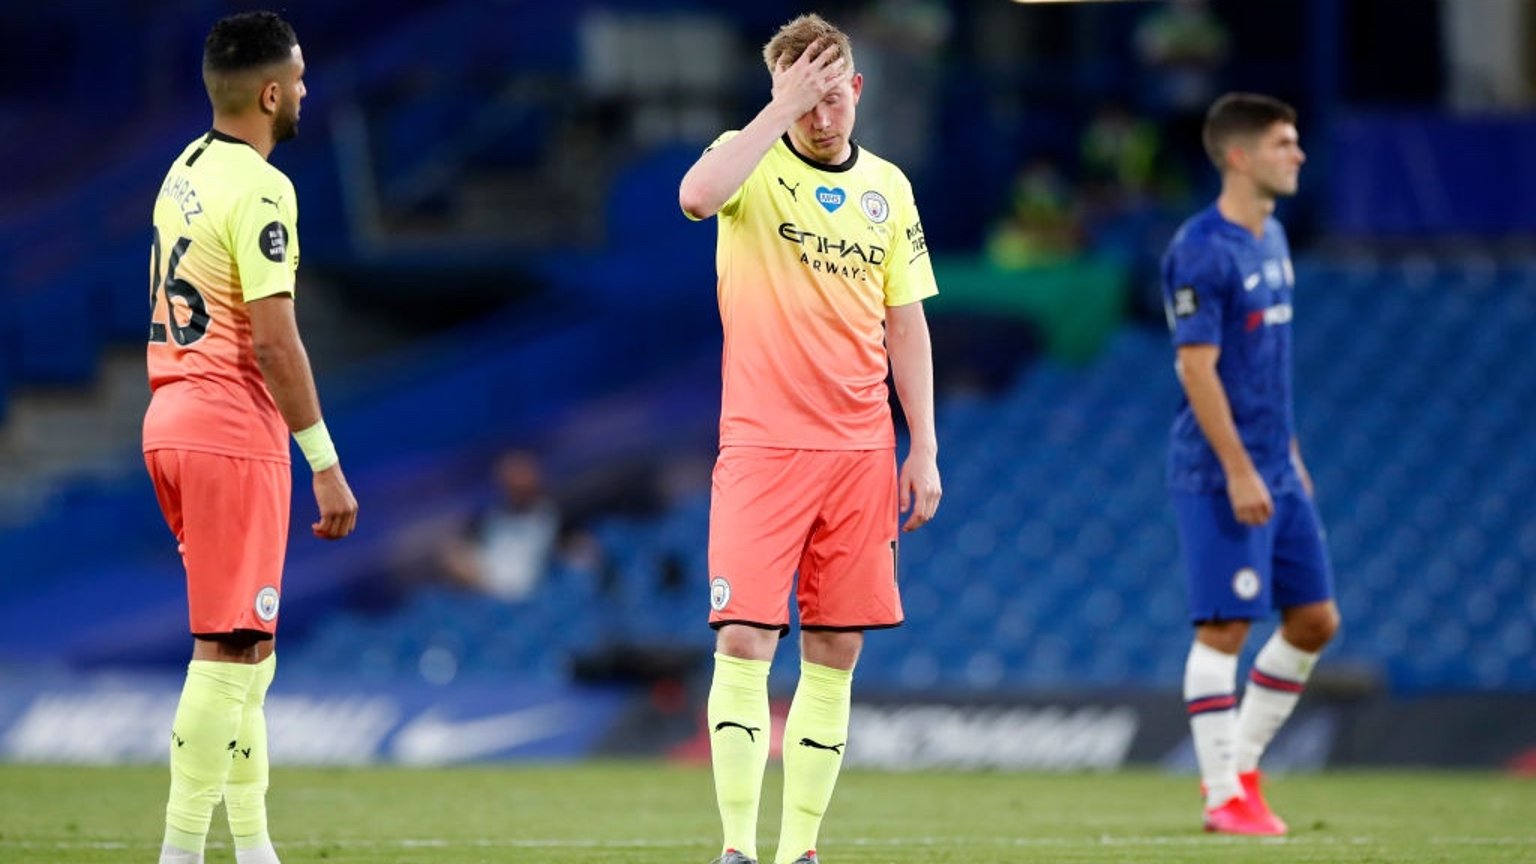 DISAPPOINTMENT: De Bruyne looks dejected at full-time.